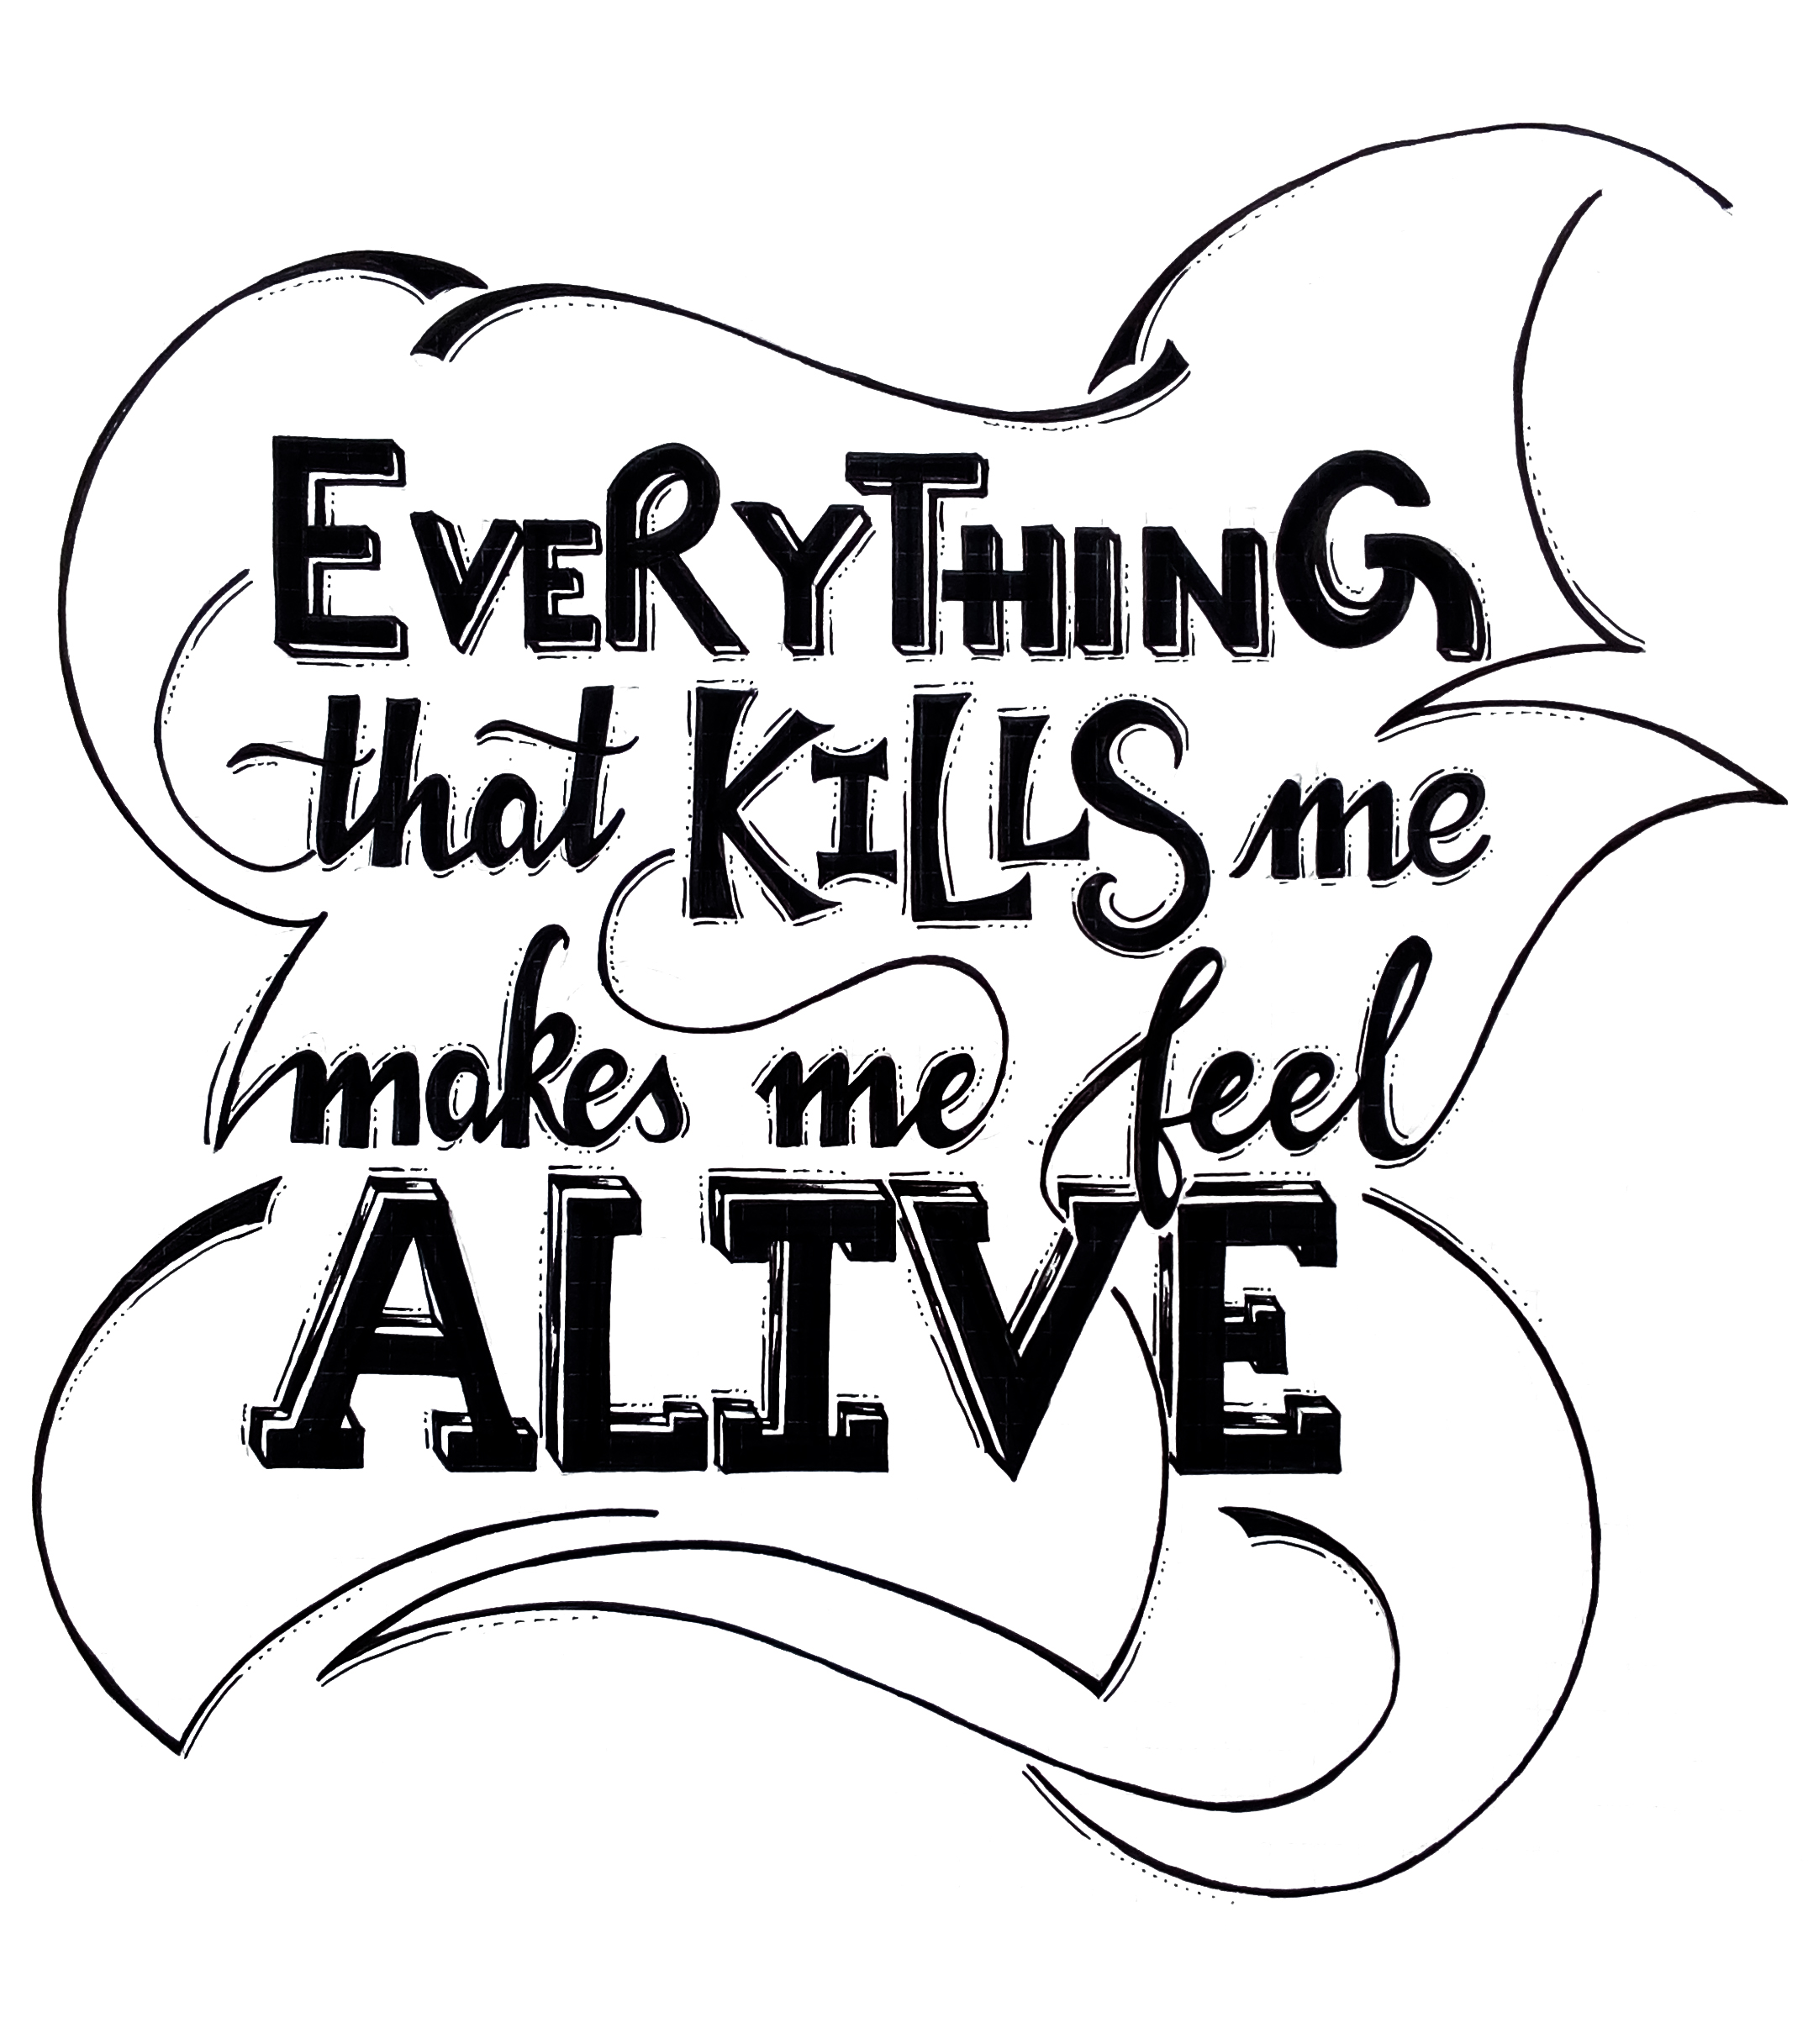 Everything that kills me makes me feel alive - Quoted from a song